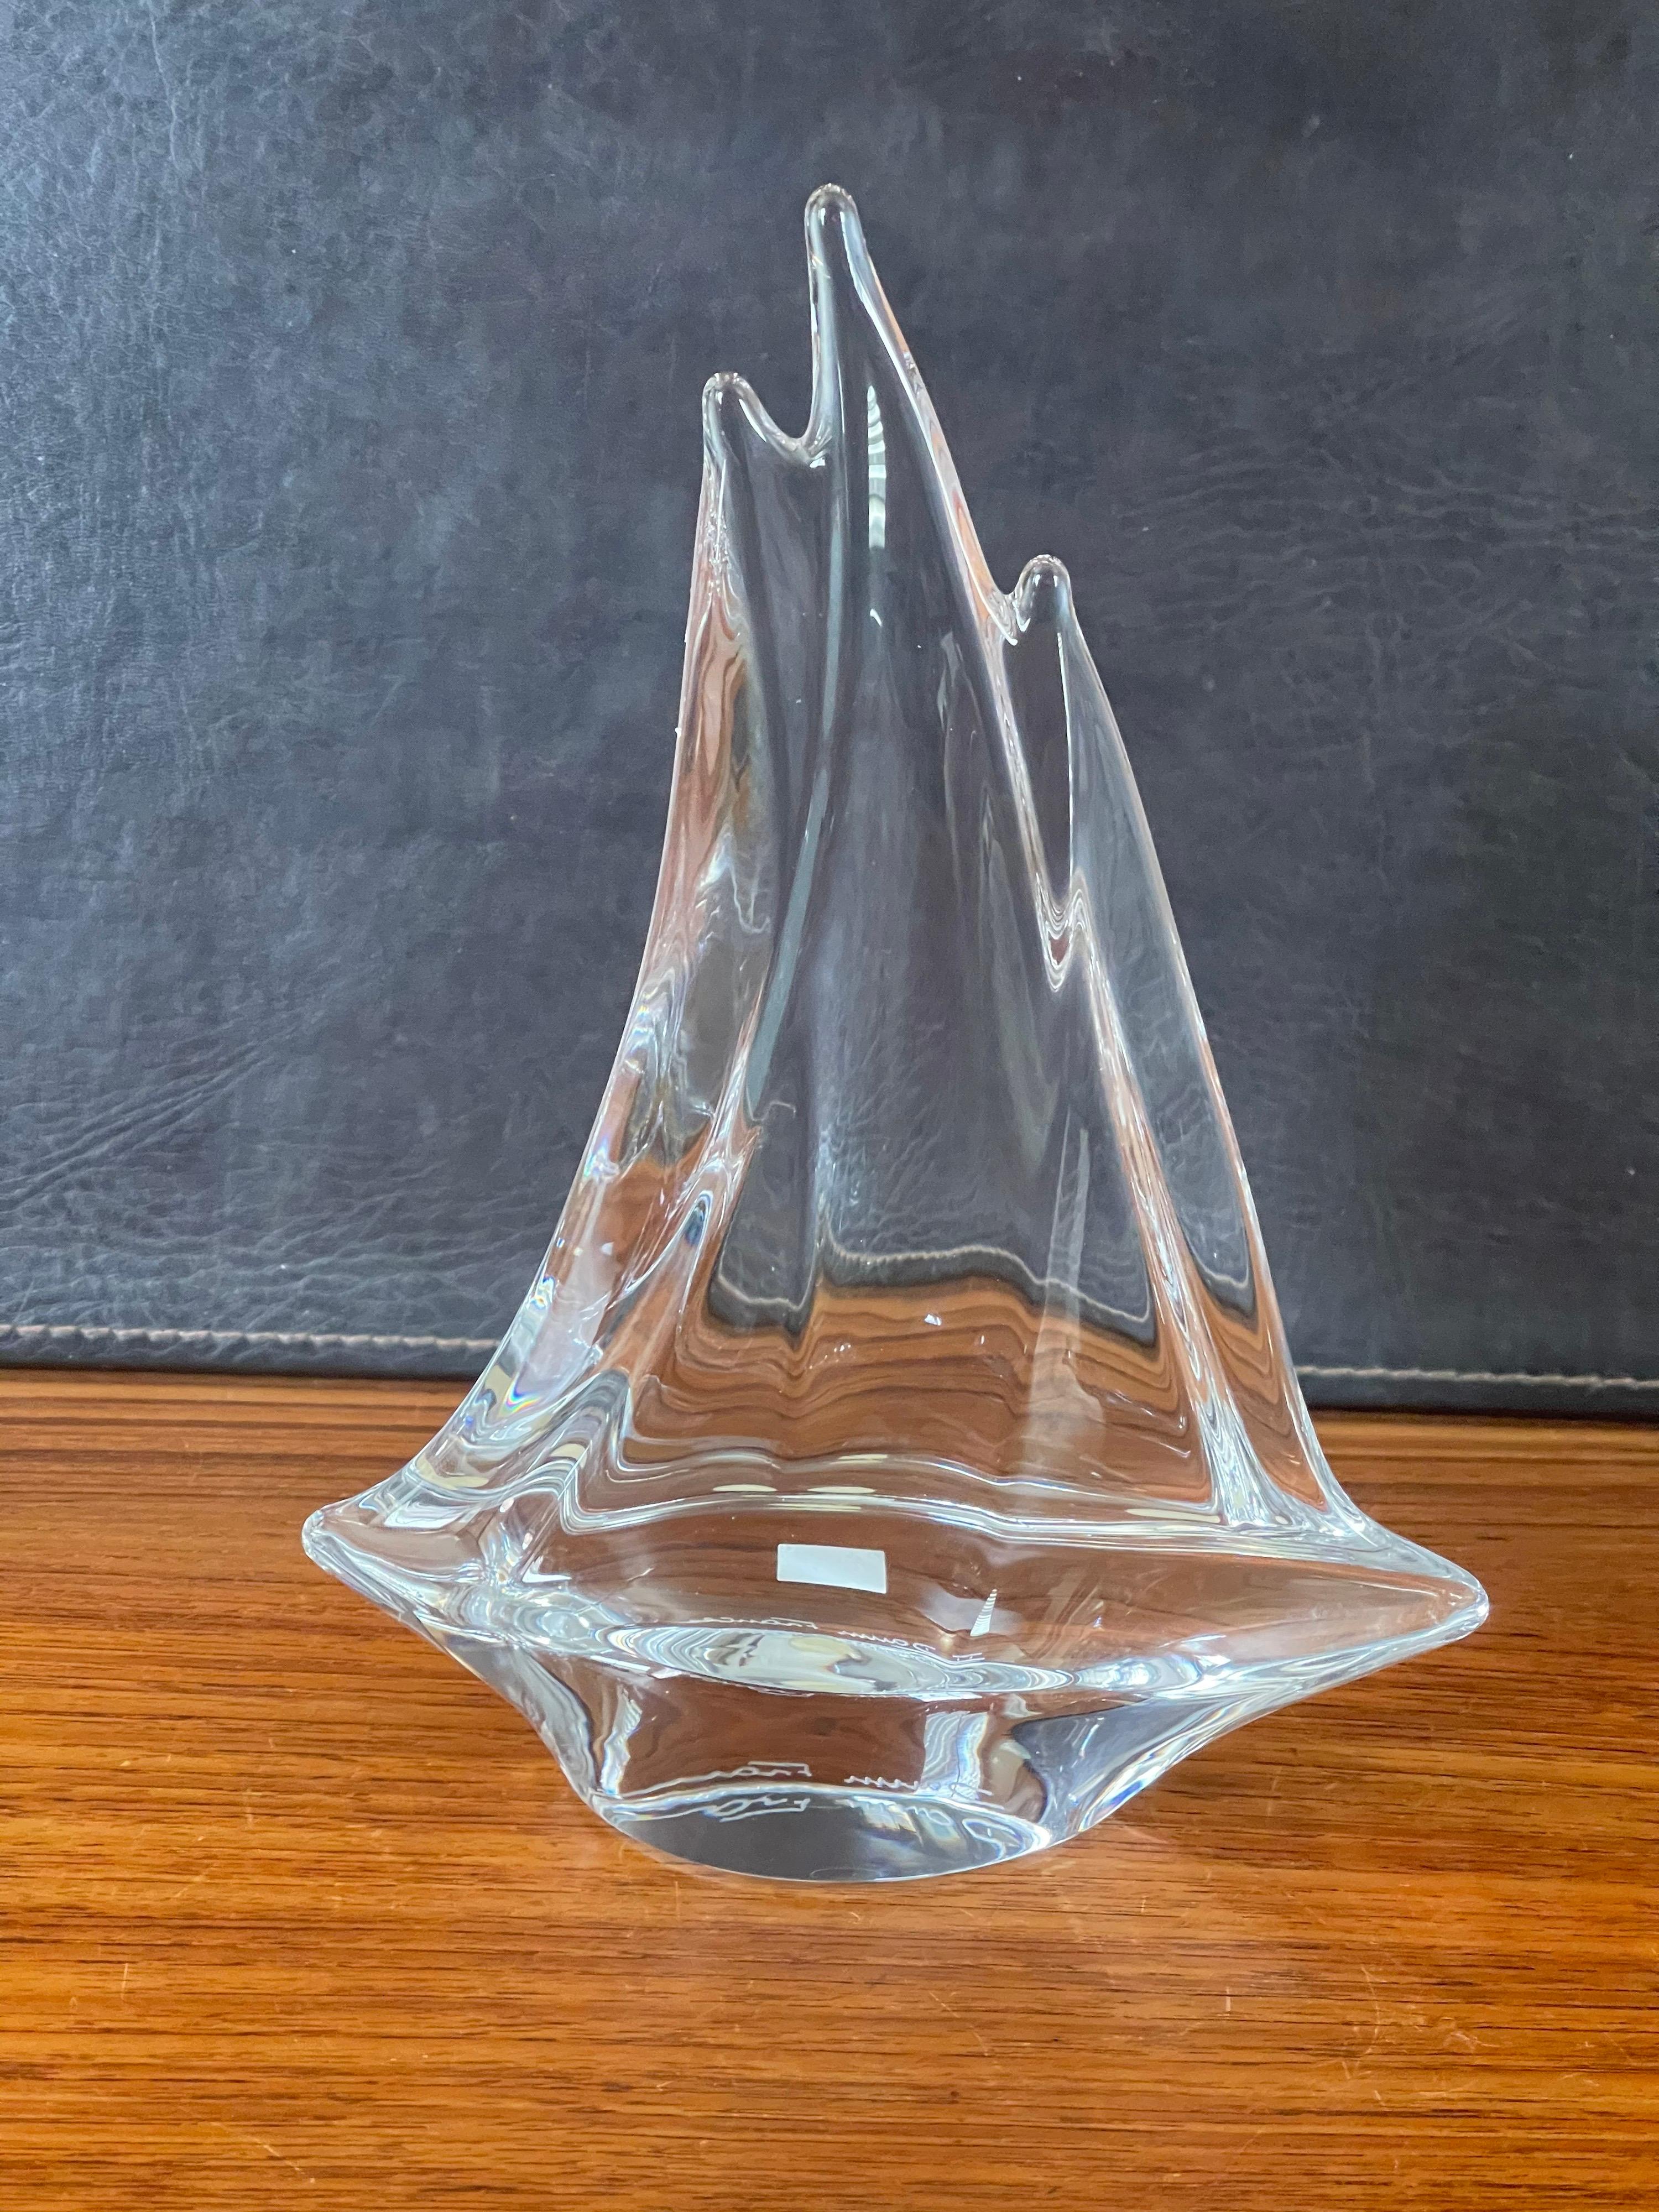 Crystal Sailboat Sculpture by Daum France 2